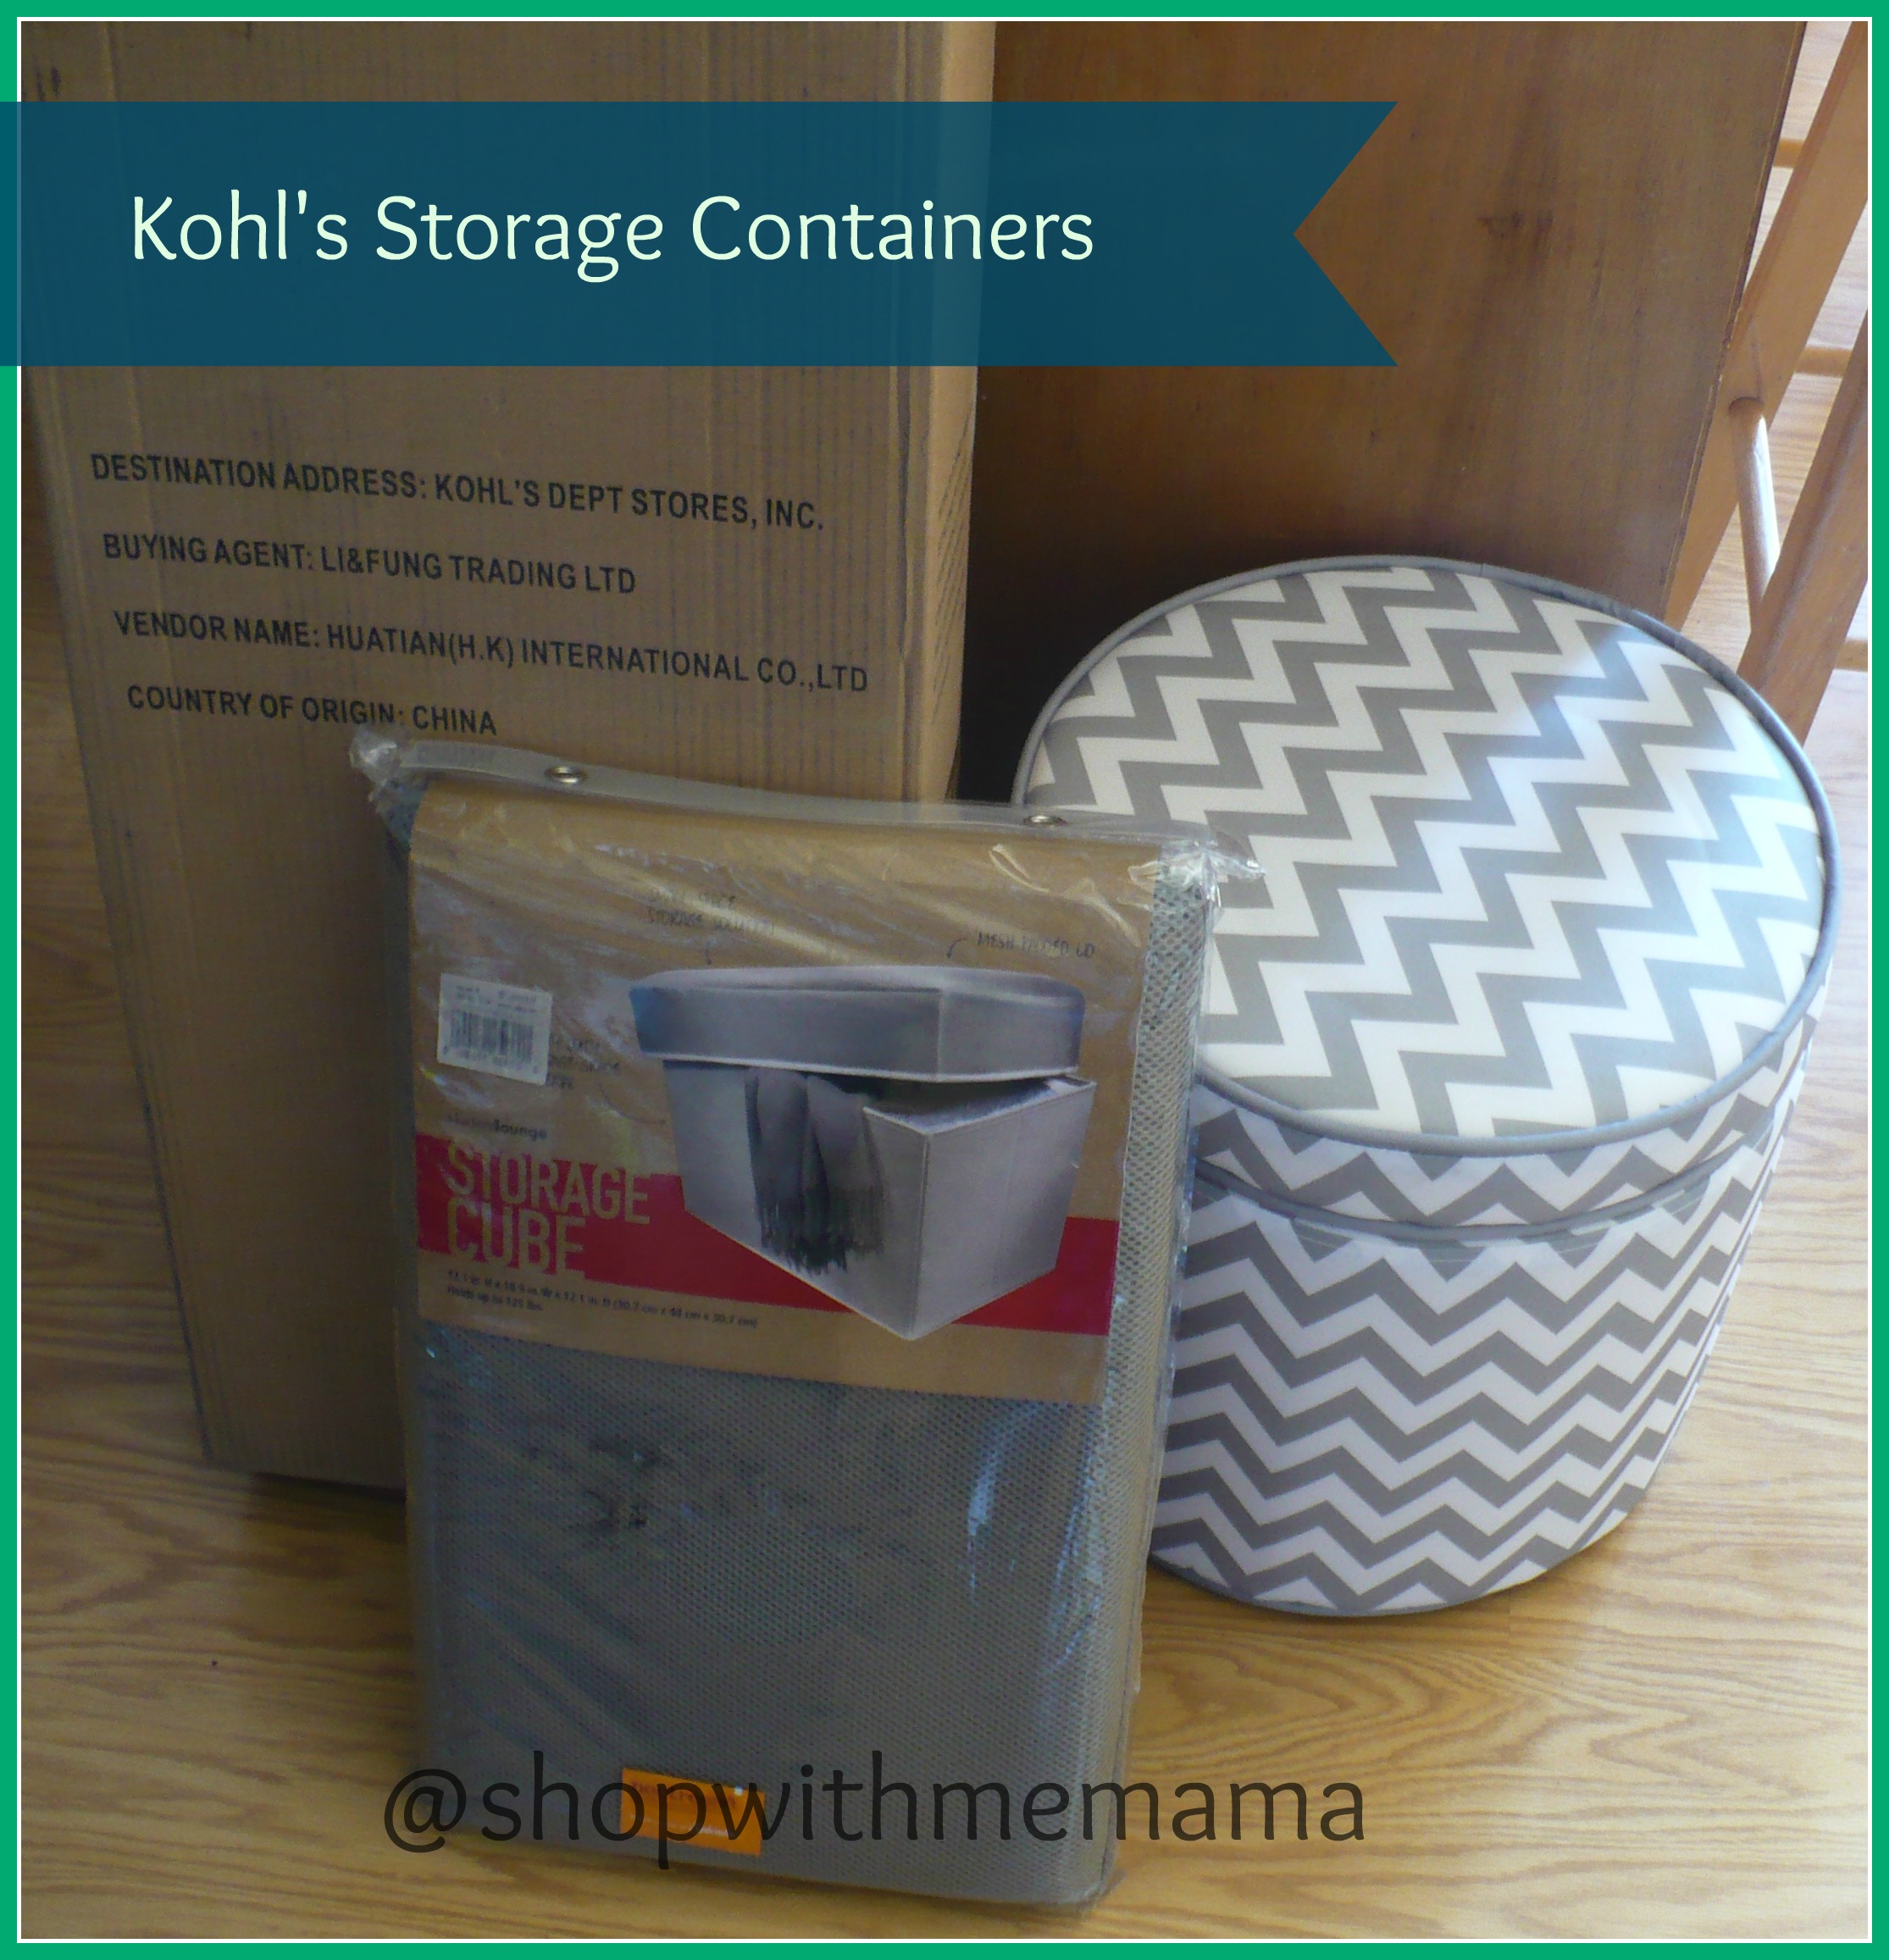 Inexpensive Storage Items from Kohl's